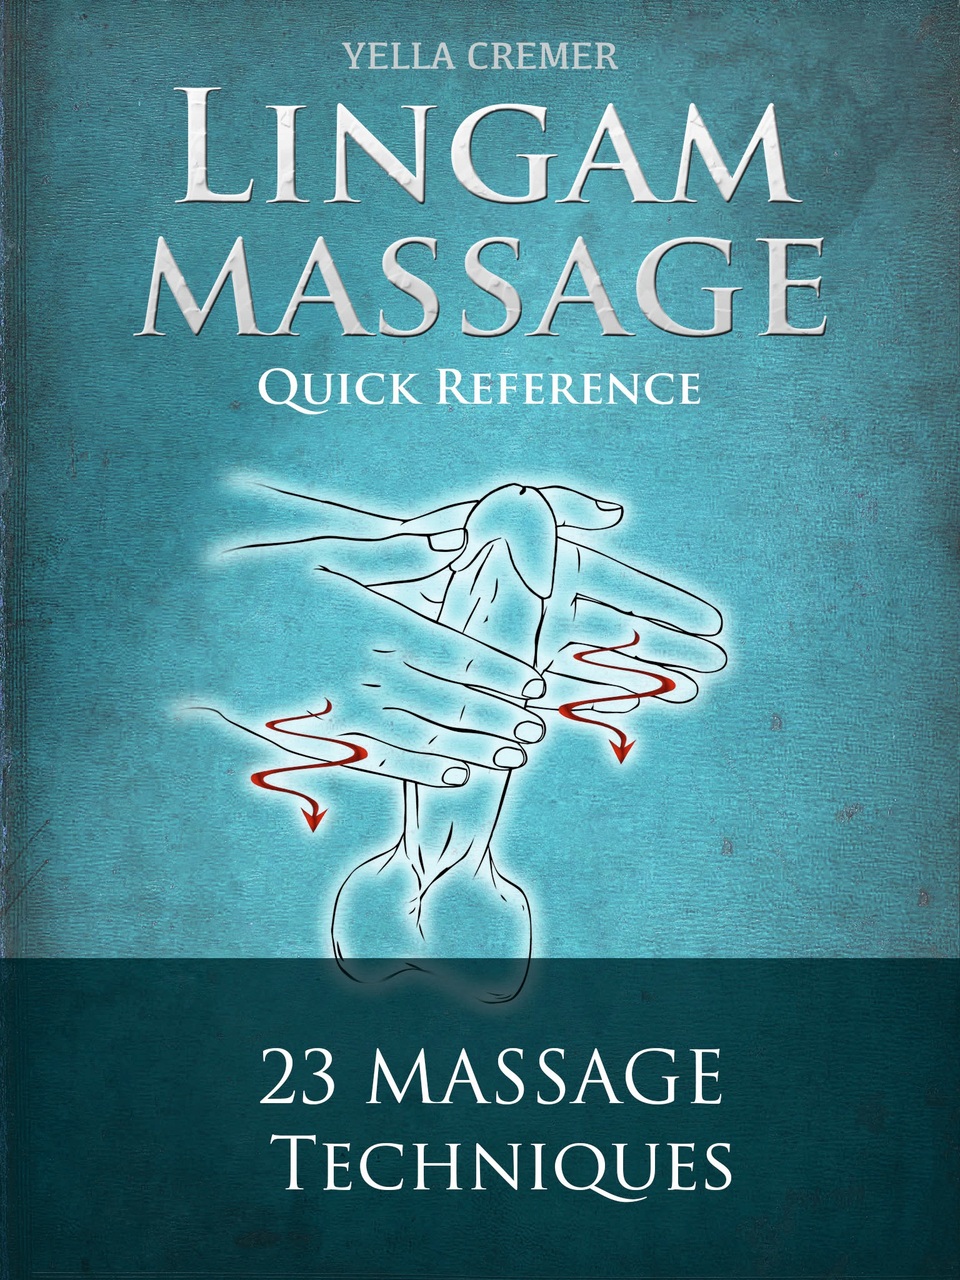 anton perry recommends Lingam Or Yoni Massage